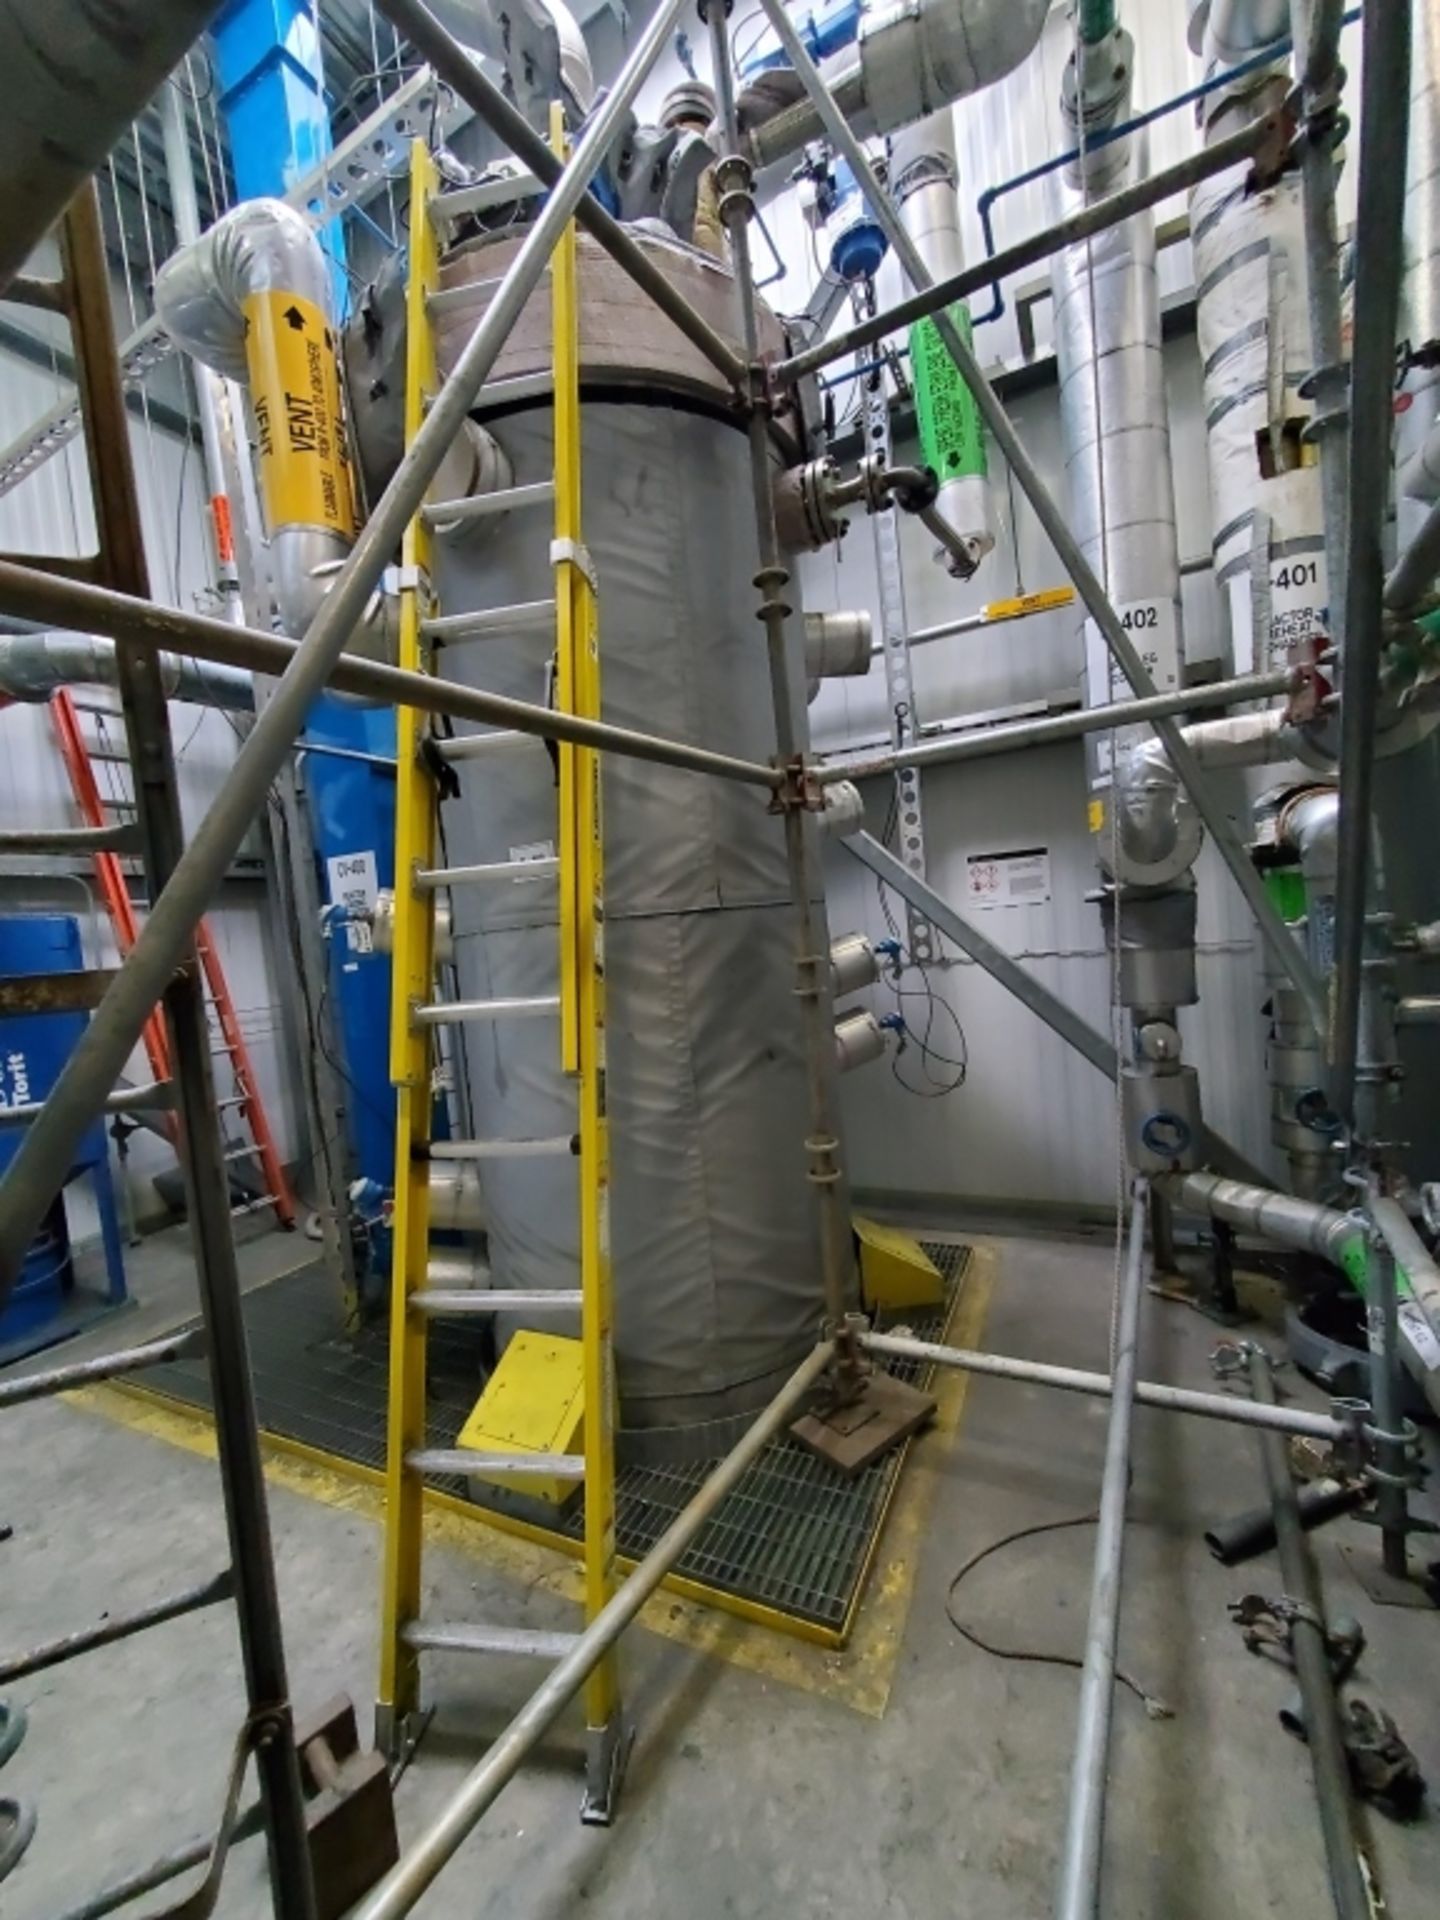 2012 Fourinox Jacketed Reactor Vessel - Image 3 of 10